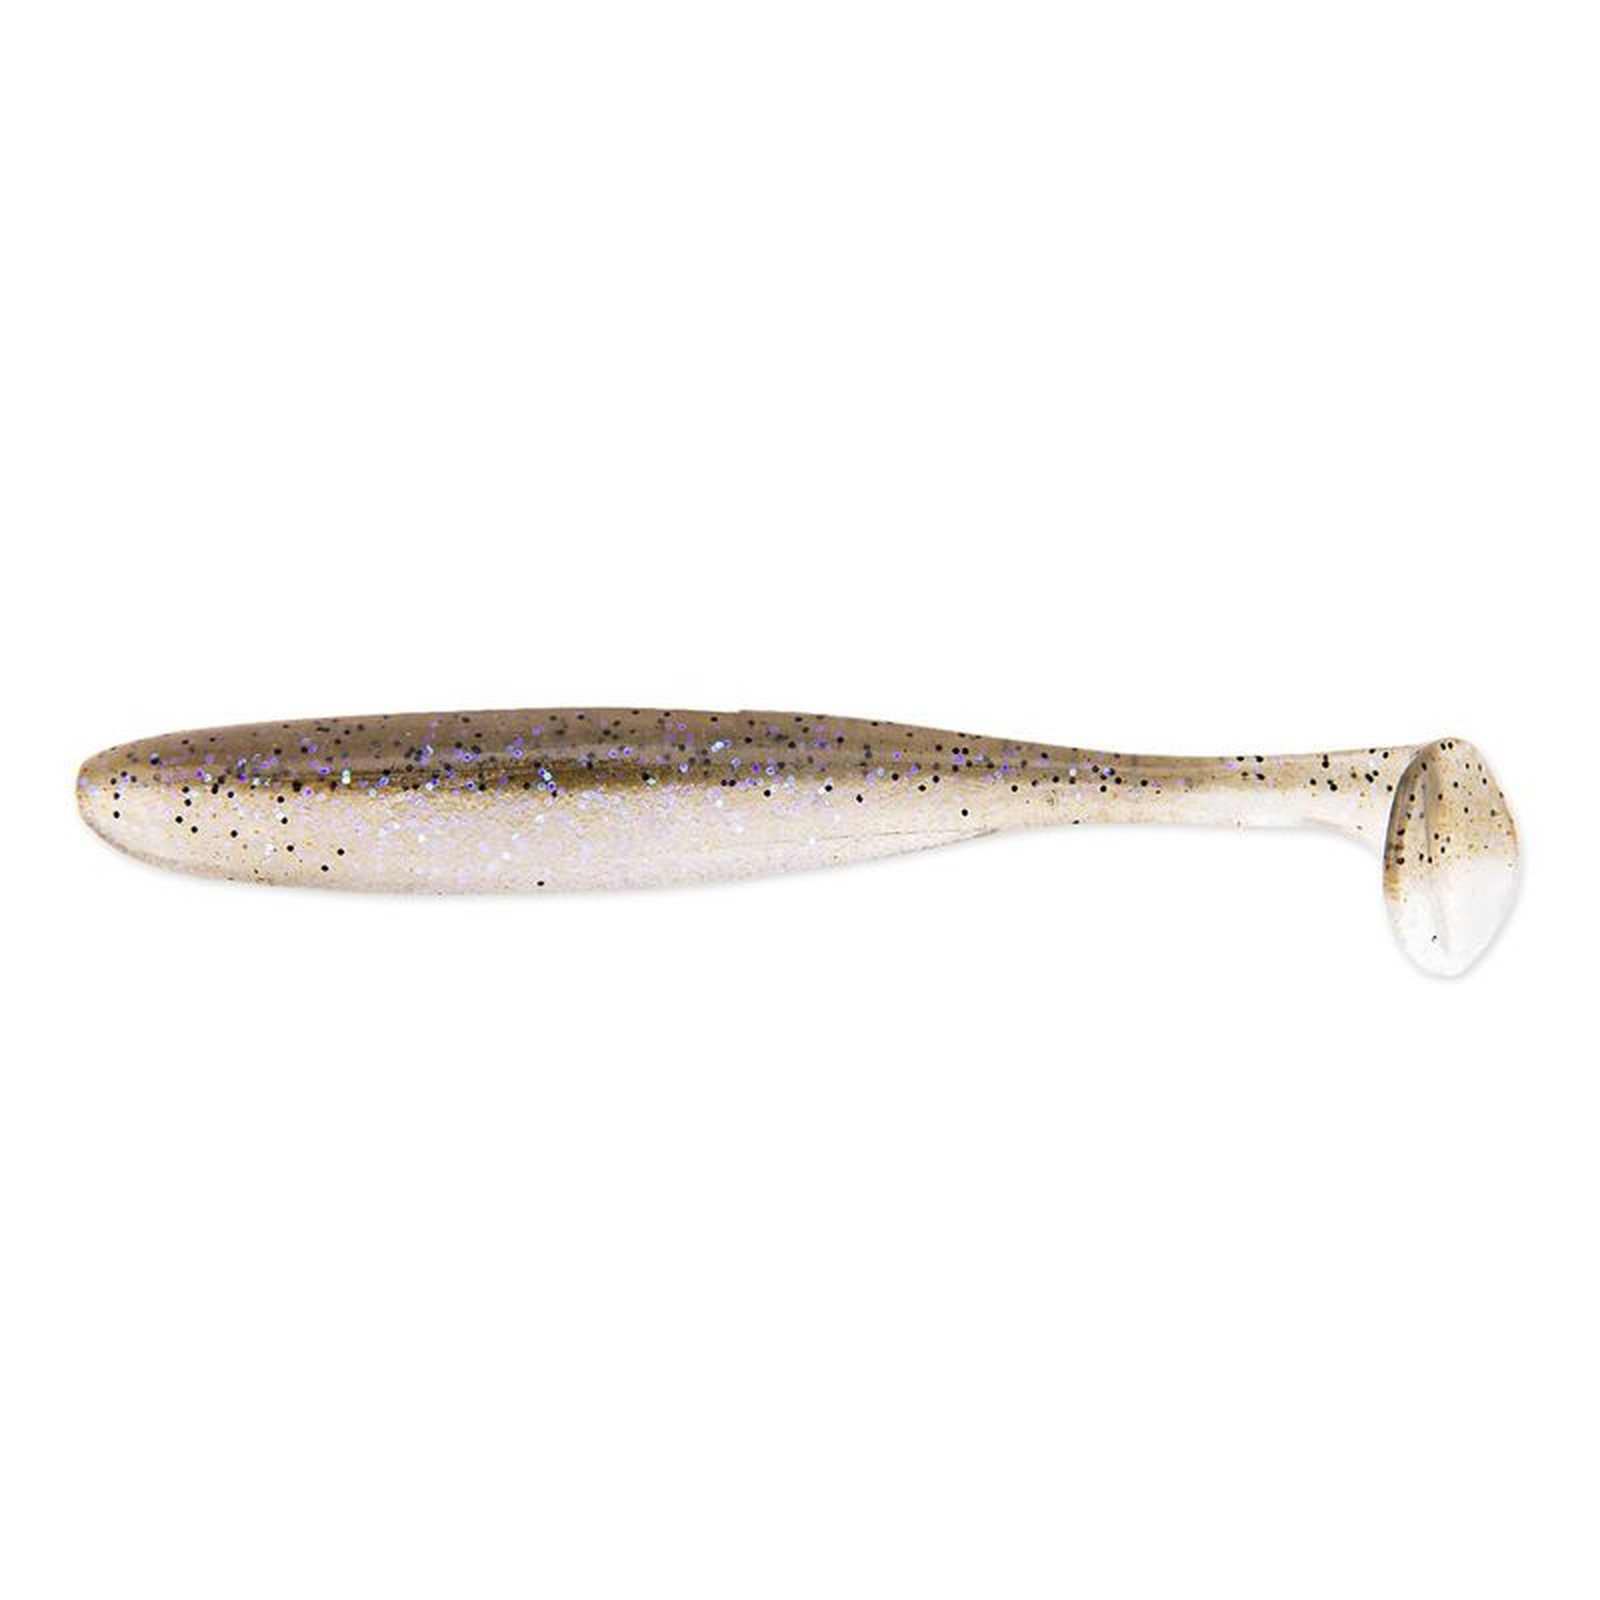 OUT/OUT_ARTICOLI/areapesca.it_AP01039.4582.4578_easy-shiner-8---20-cm---k440-electric-shad.jpg